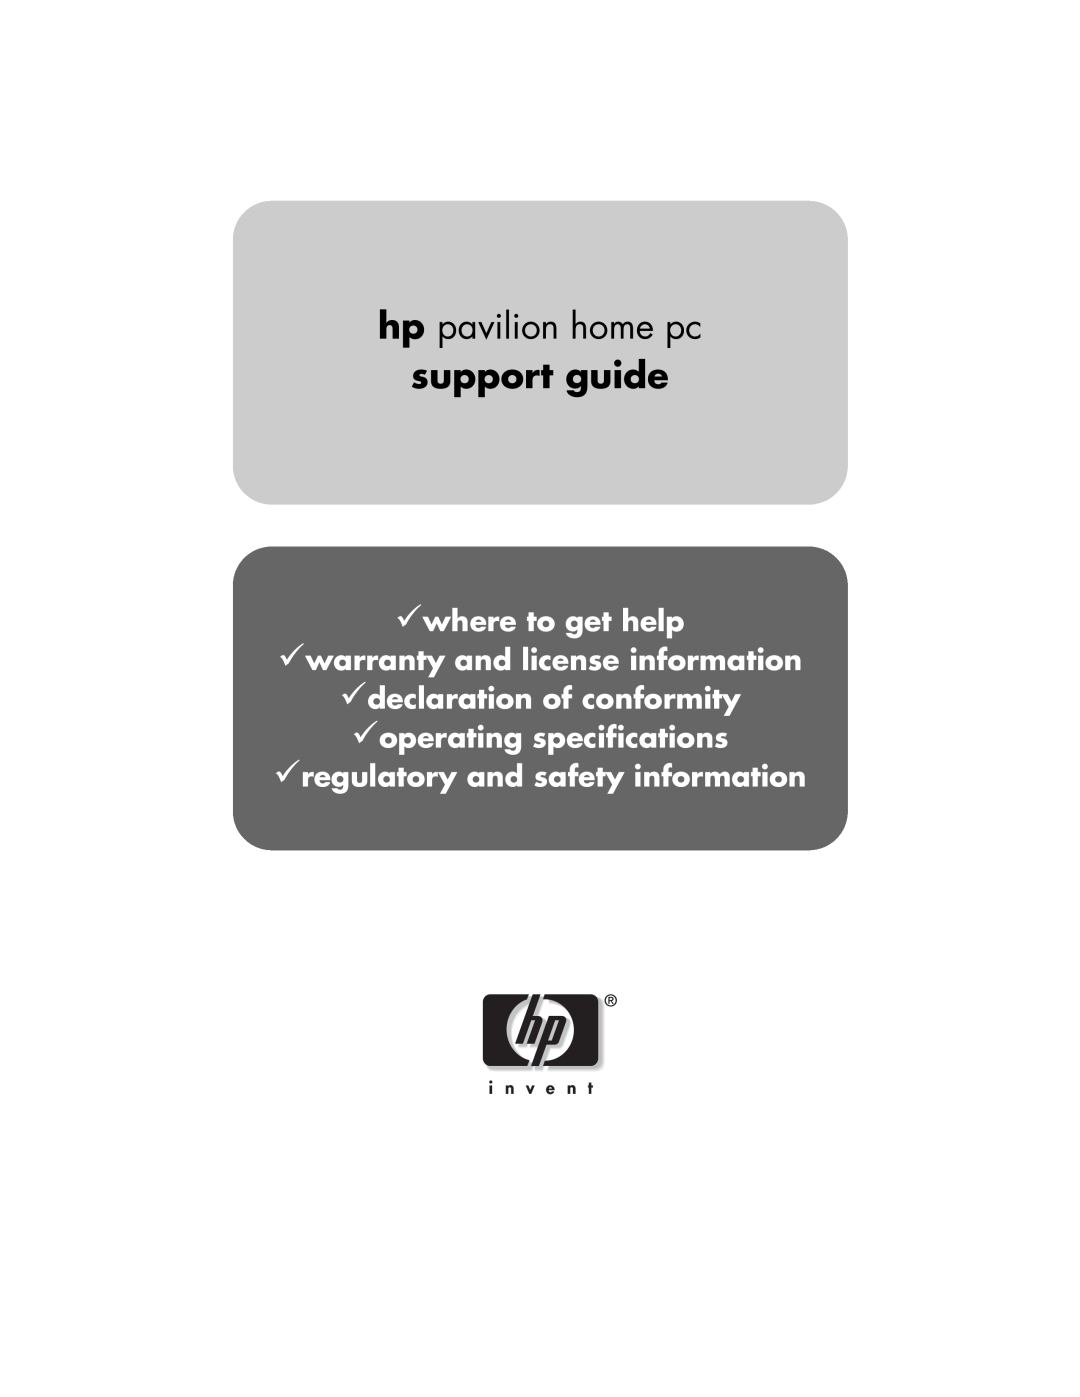 HP 724c (US/CAN), 524w (US) manual where to get help warranty and license information, hp pavilion home pc, support guide 